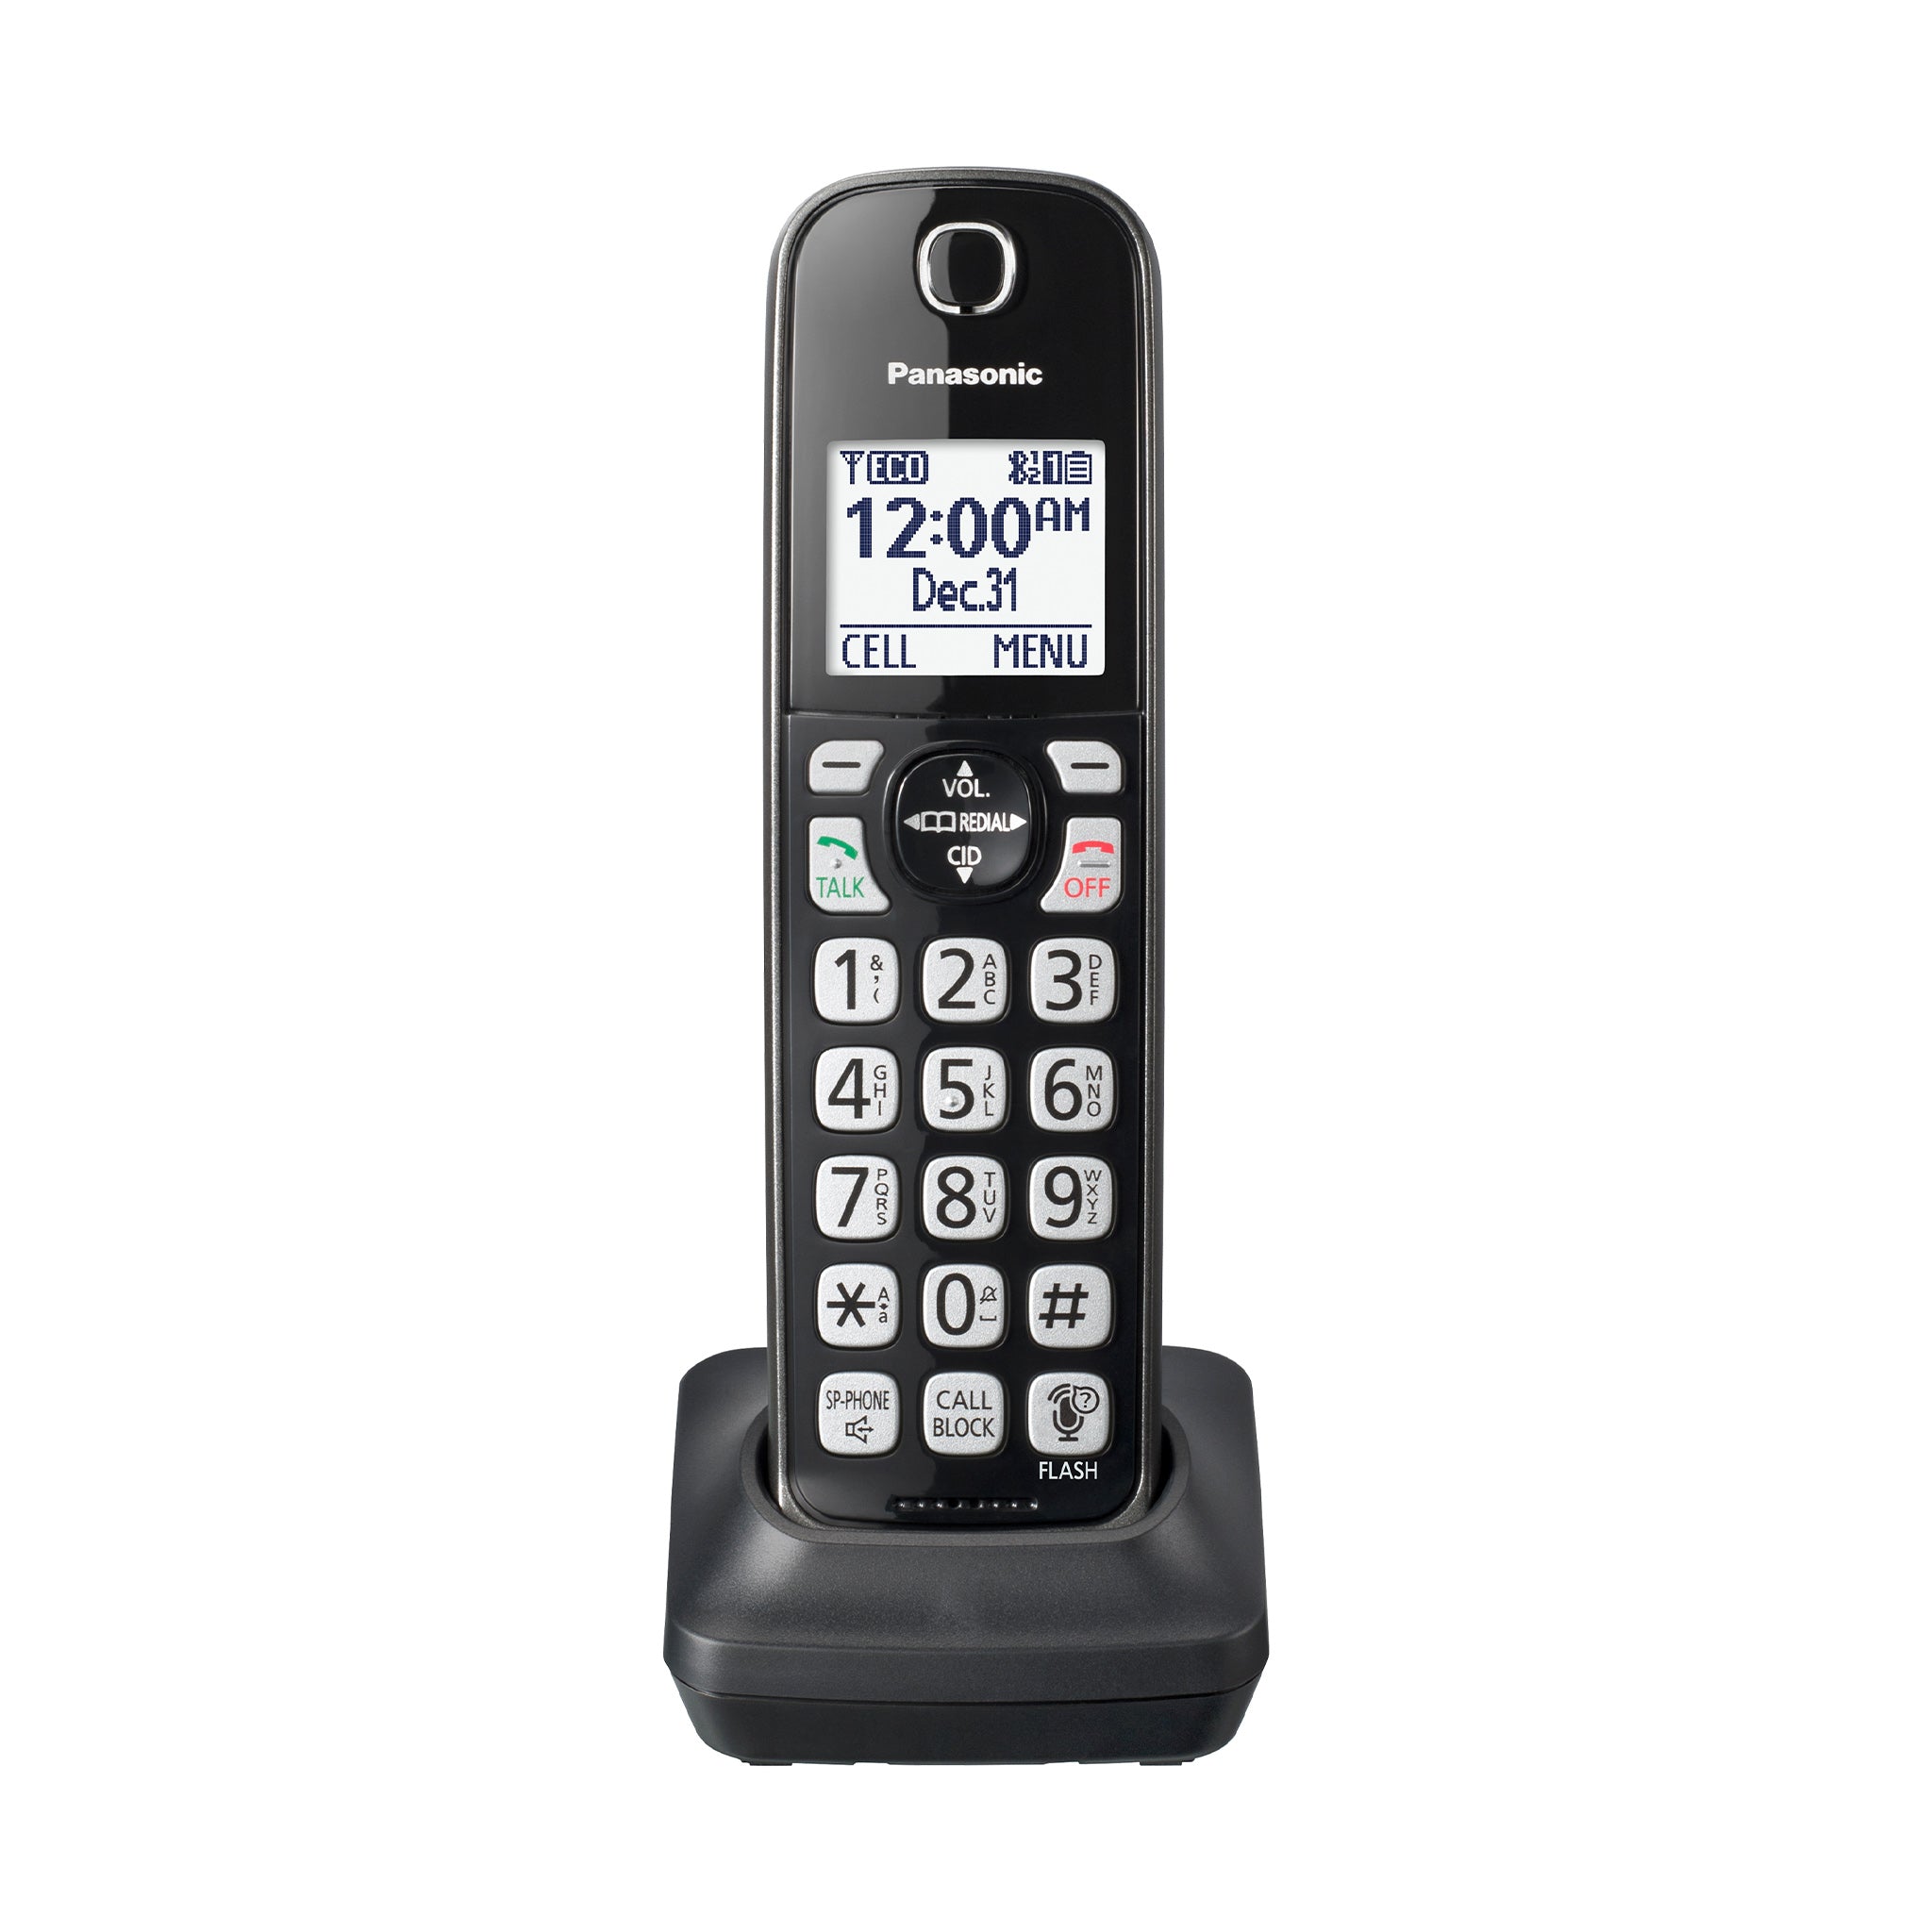 Cordless Phone Accessory Handset for TGD56x Series